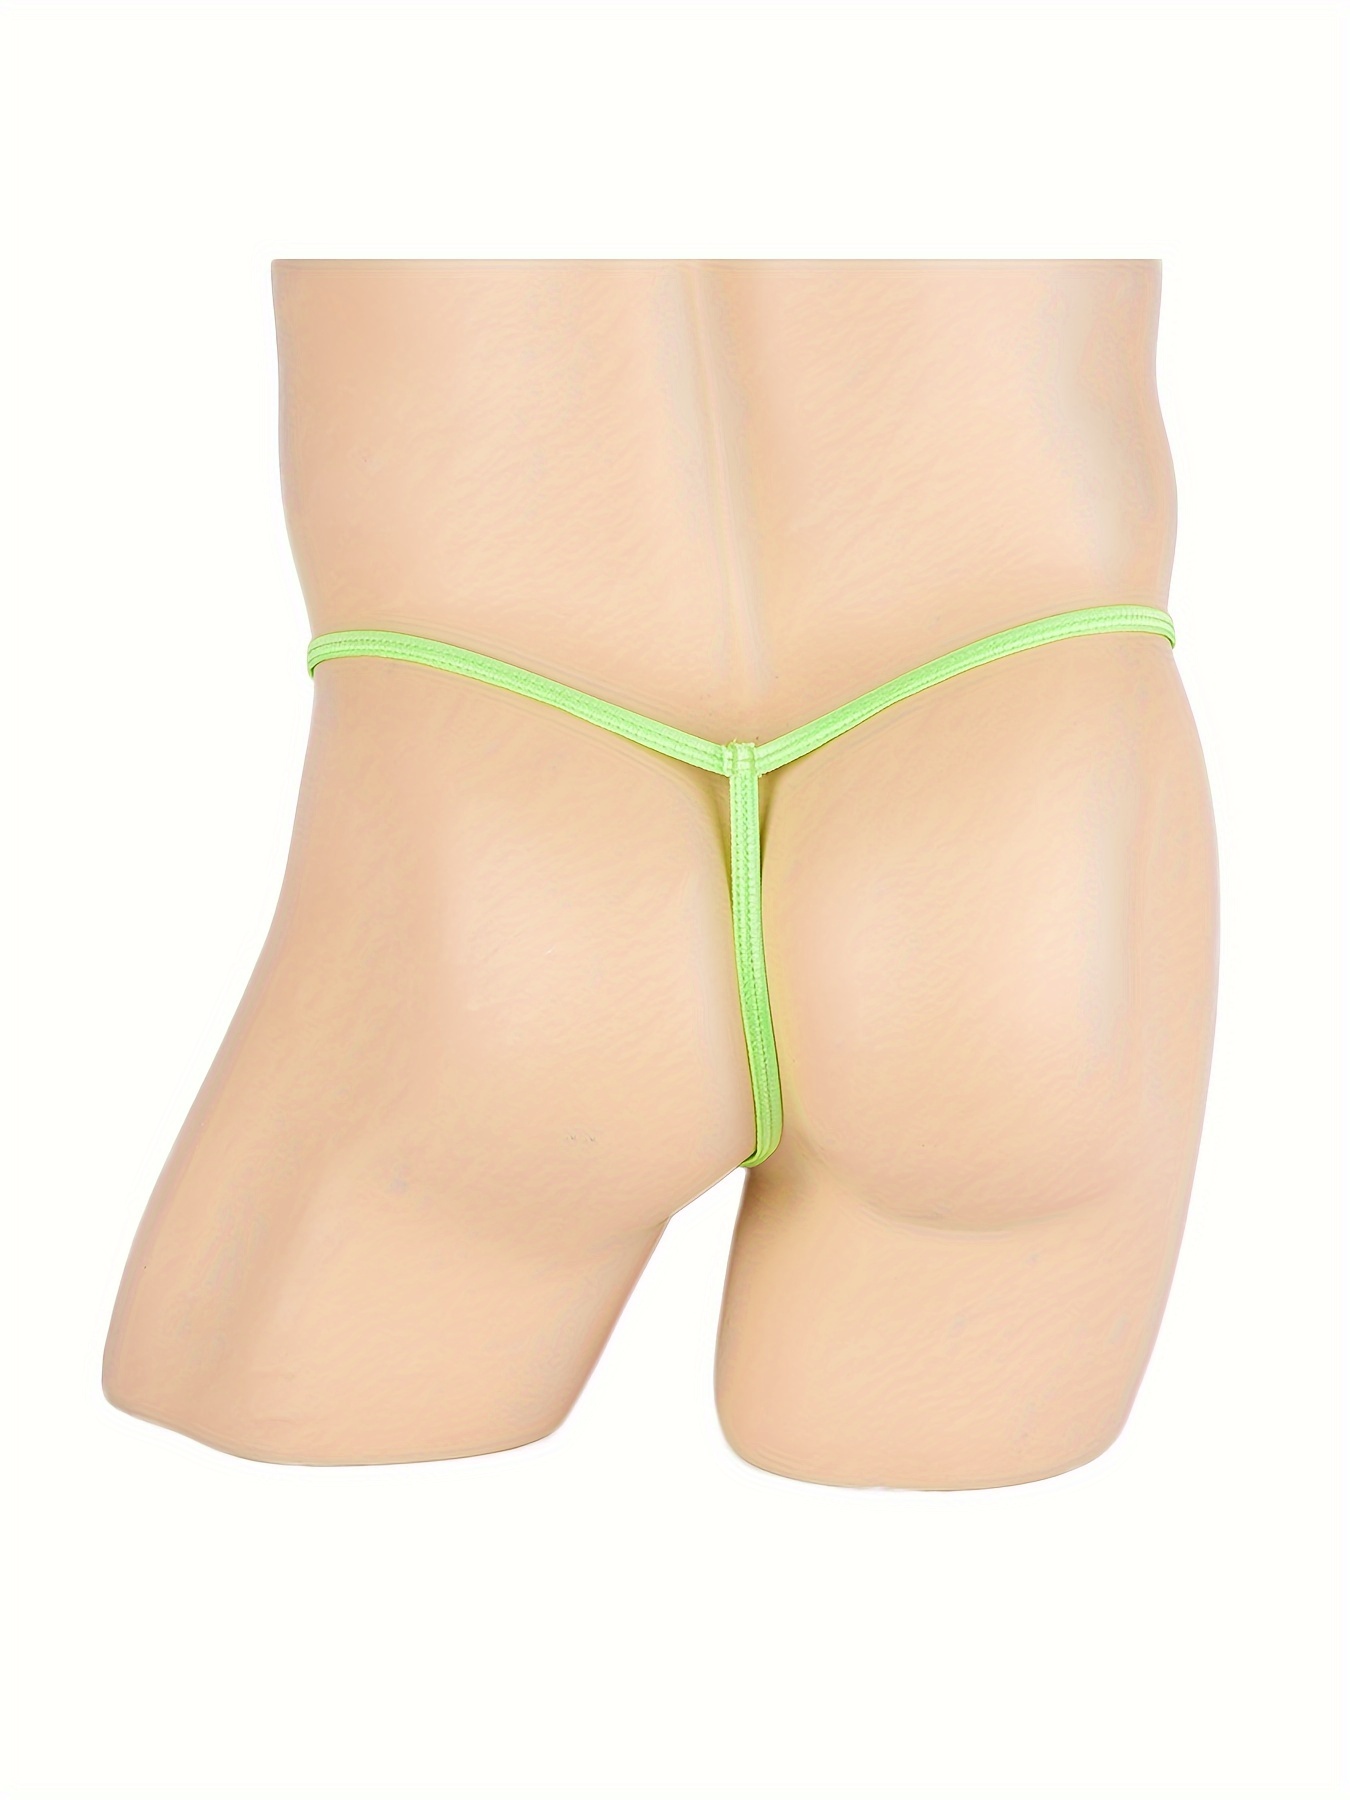 MENS OPEN FRONT Hole T-back Lingerie Crotchless G-string Thong